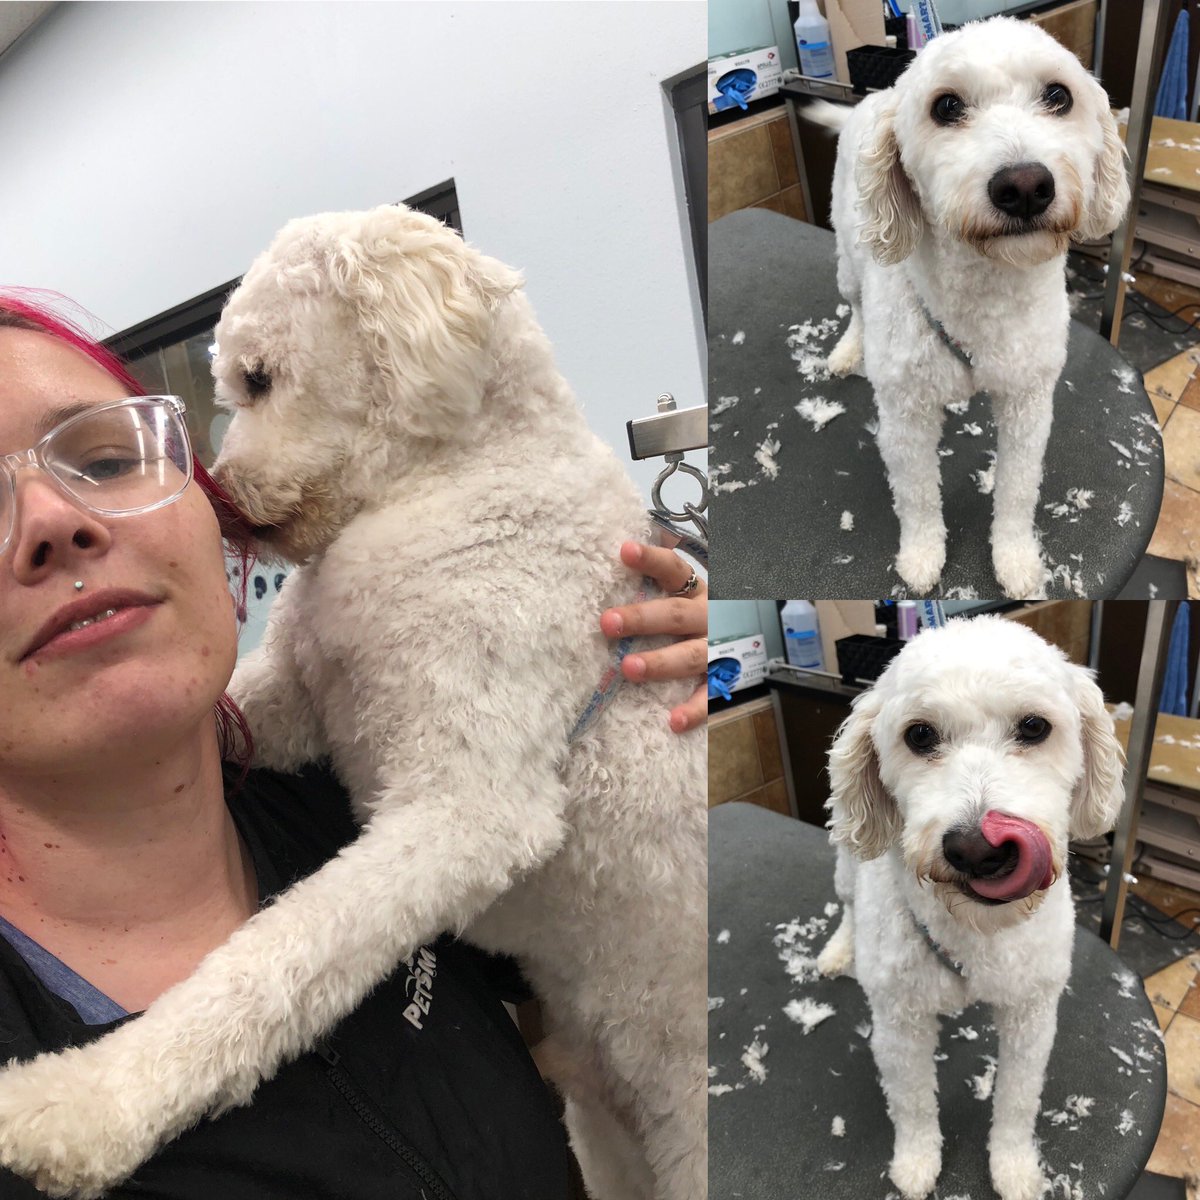 Ayce never fails to smother me with hugs and kisses! 🐶🥰✂️
#doggroomer
#doggrooming